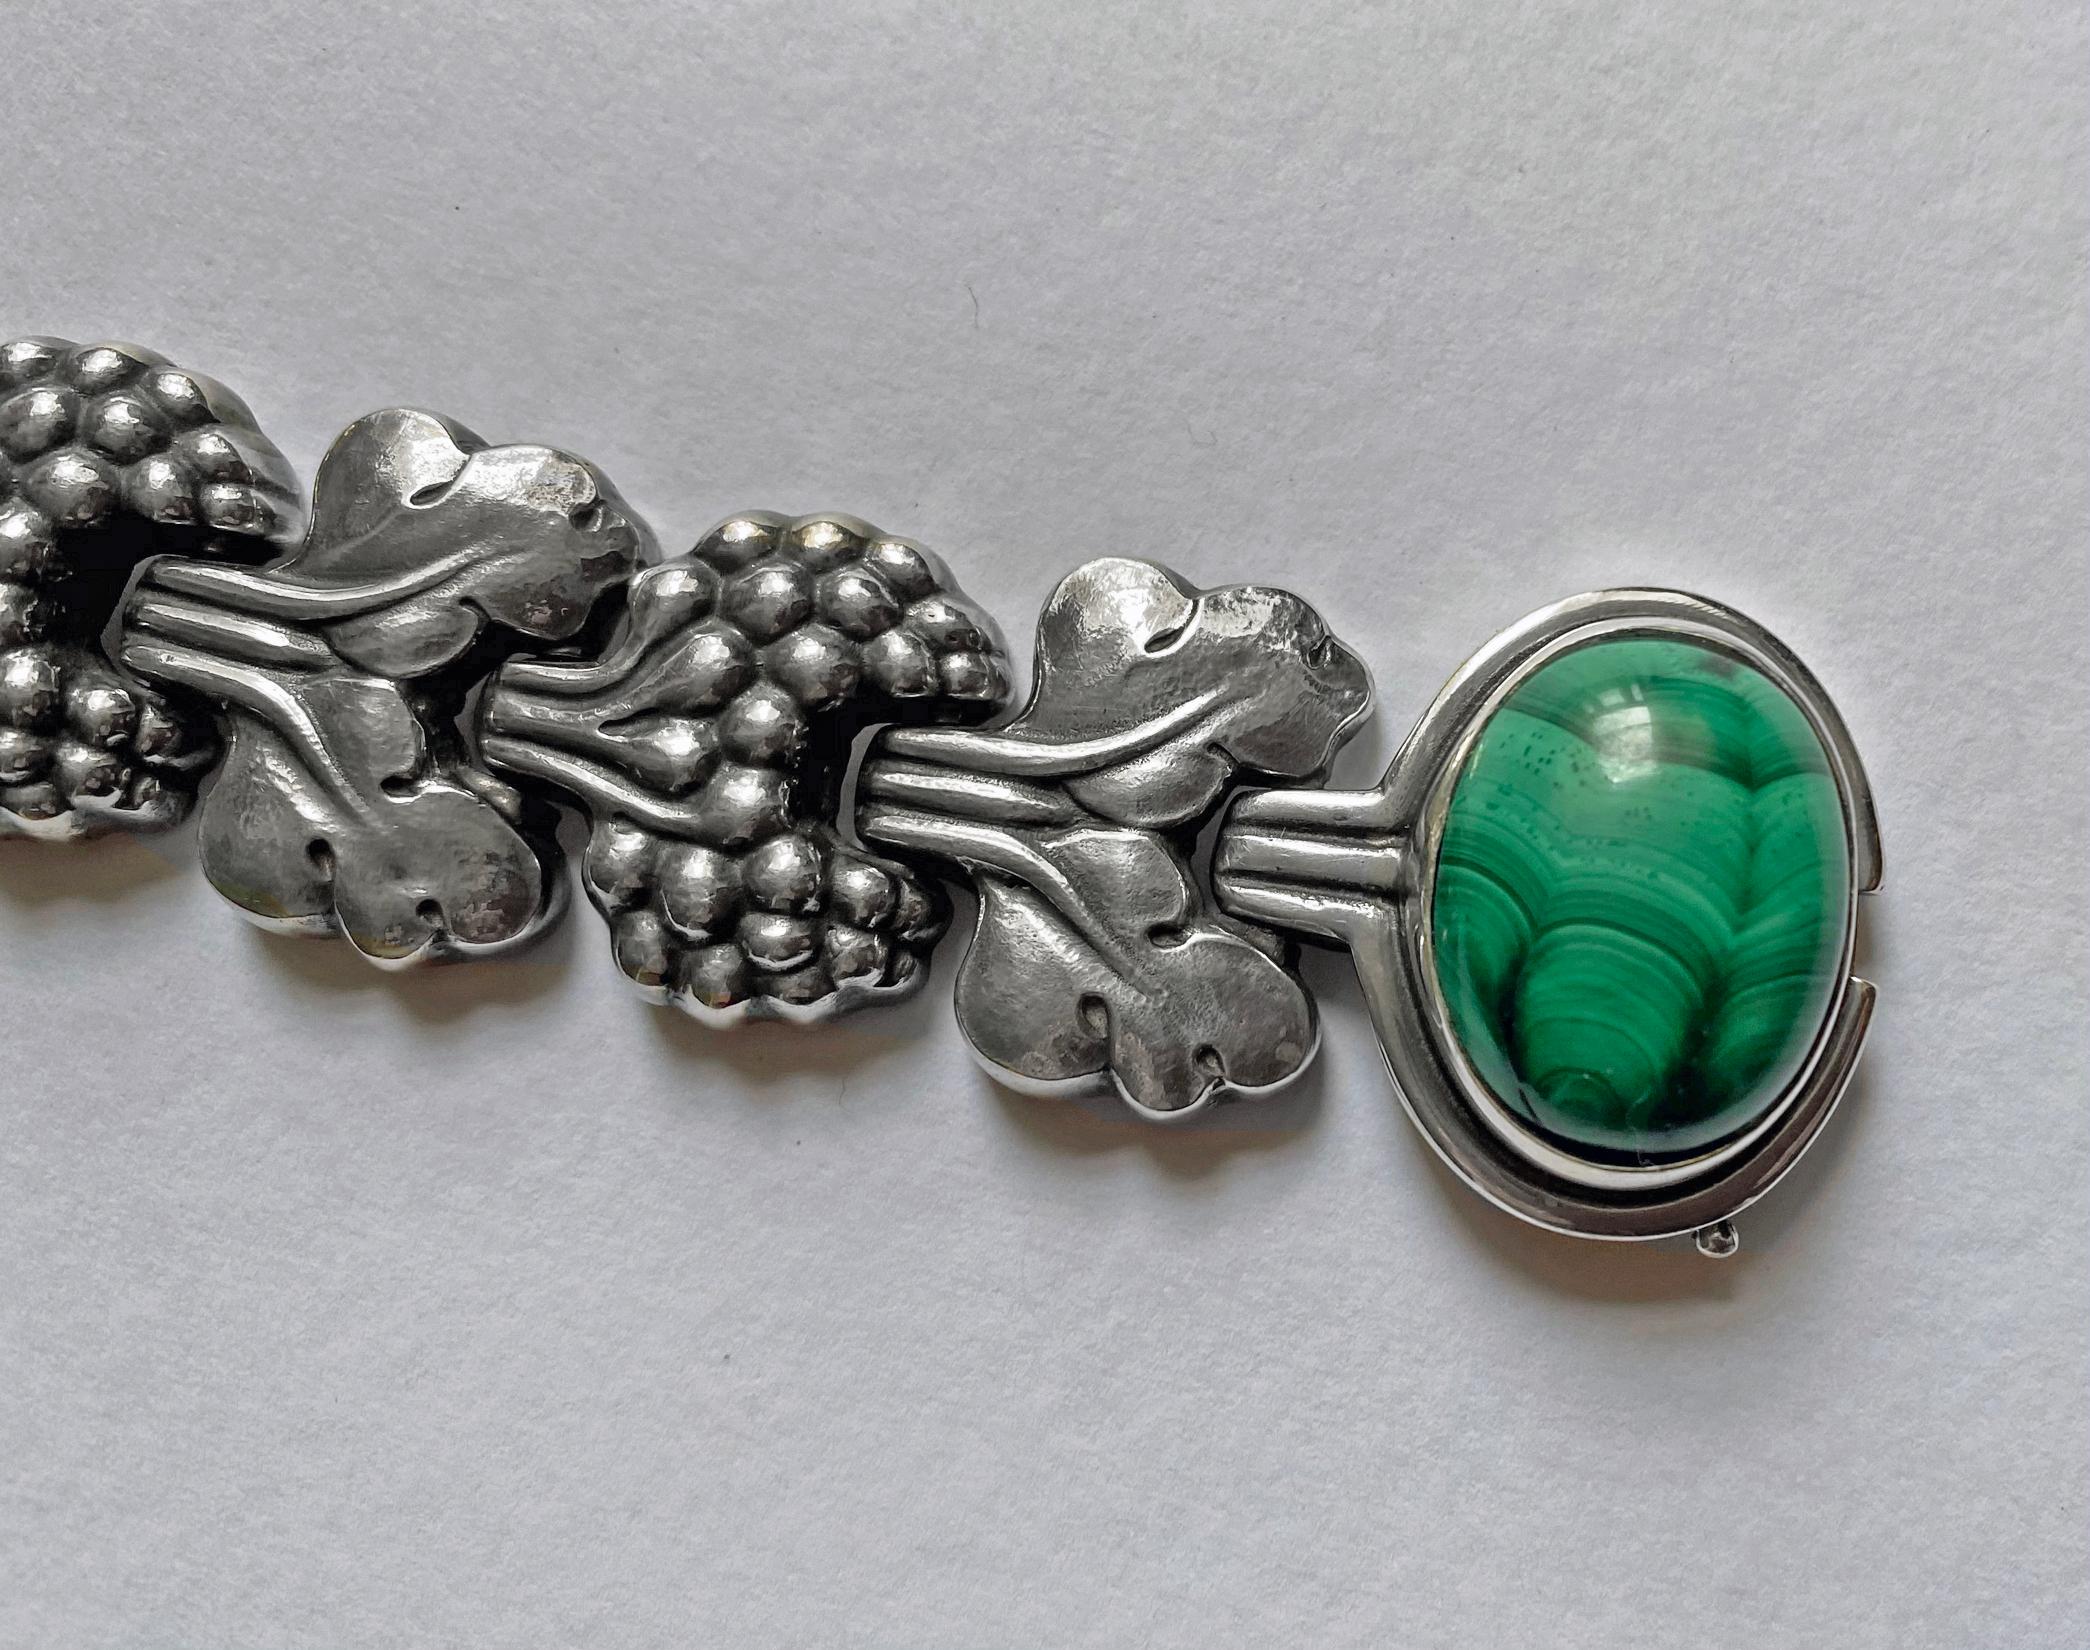 An extremely Rare Georg Jensen Sterling Silver PARIS Bracelet No 30, Denmark C.1945. Set with a large oval cabochon Malachite stone. A similar example with amber is featured in Drucker reference Georg Jensen , A Tradition of Splendid Silver, P 97.